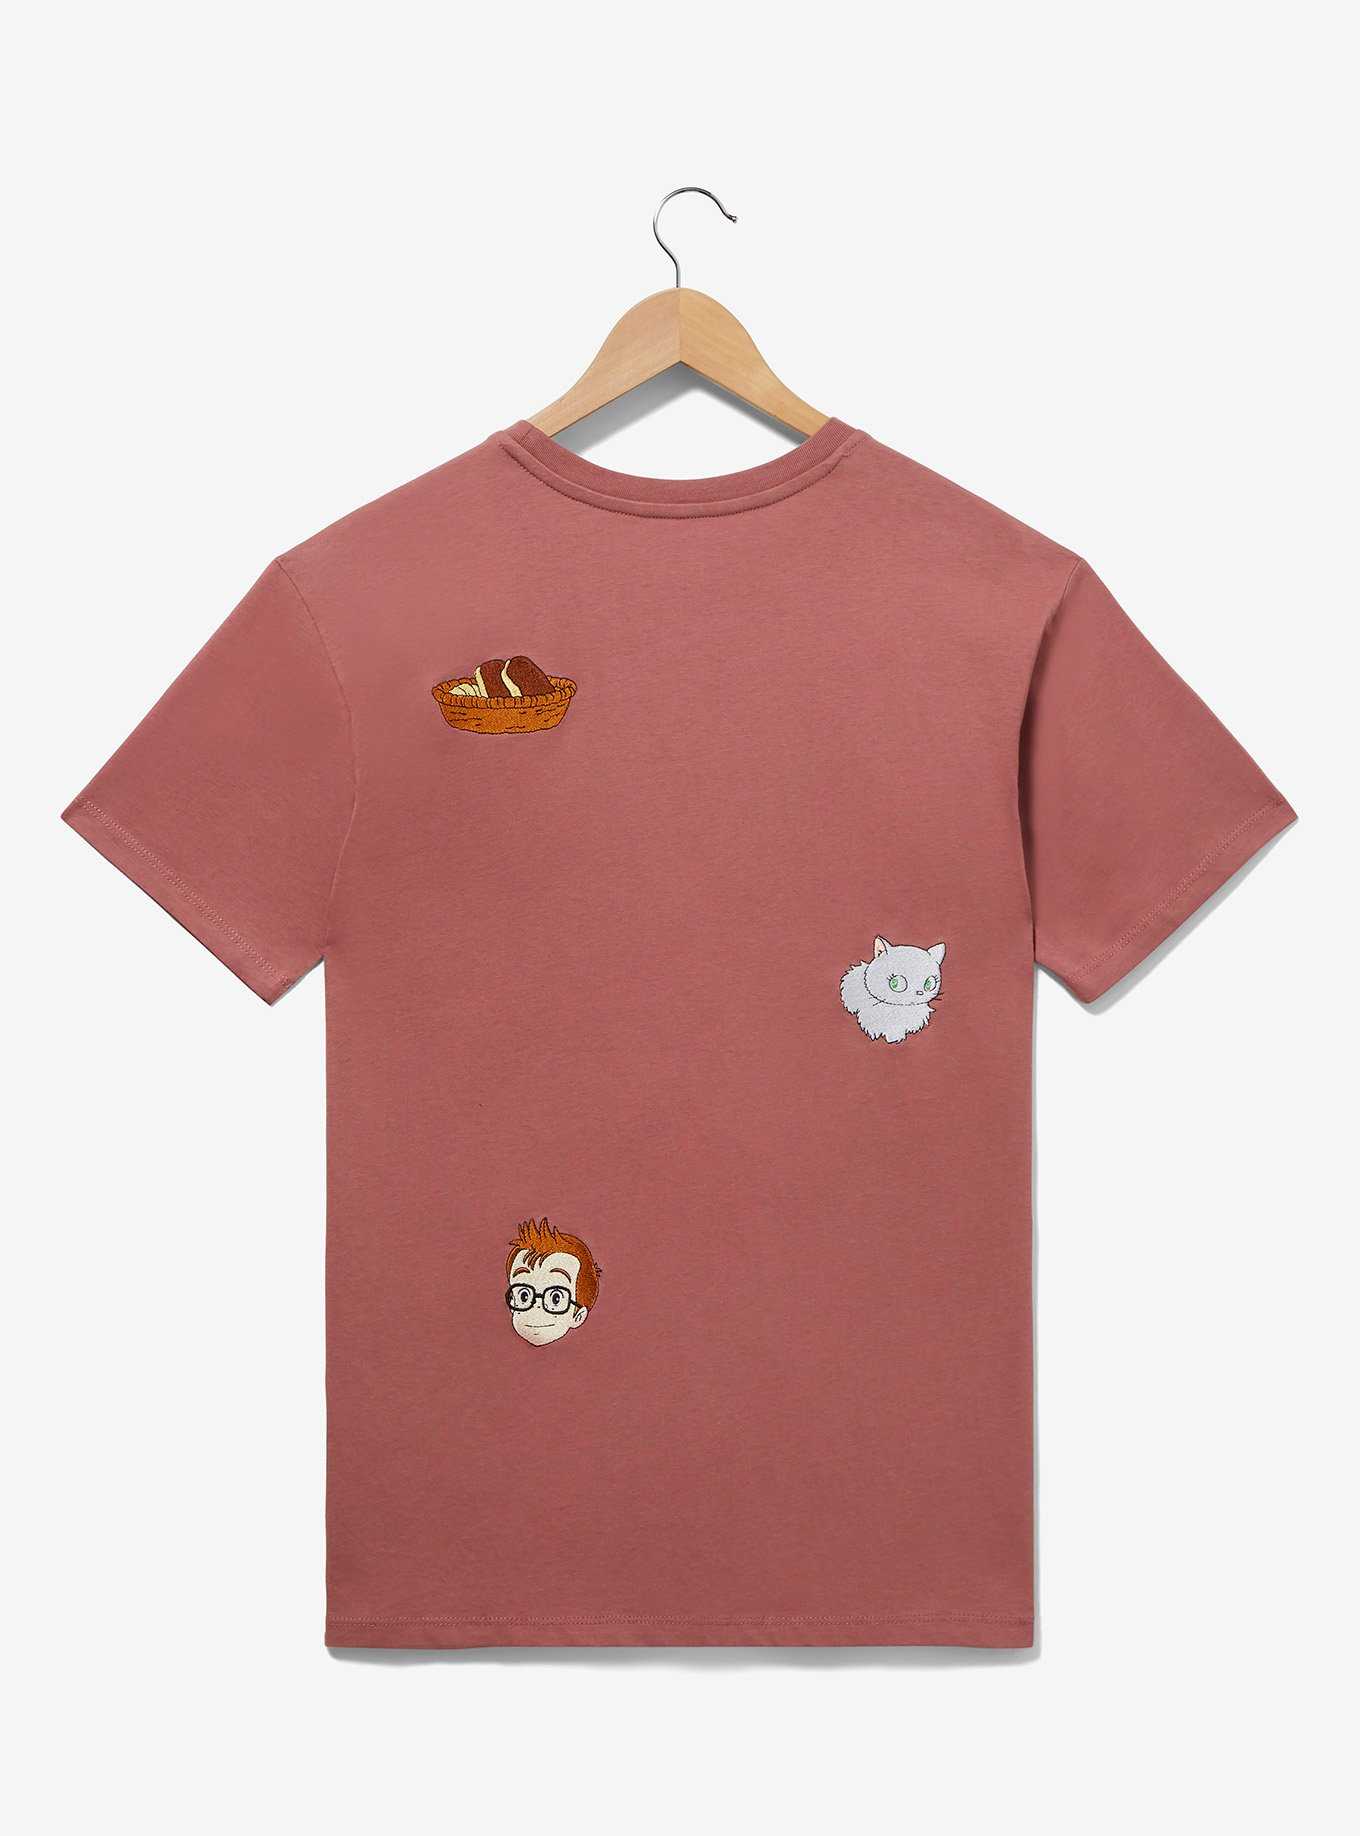 Studio Ghibli Kiki's Delivery Service Scattered Icons Embroidered T-Shirt - BoxLunch Exclusive, , hi-res